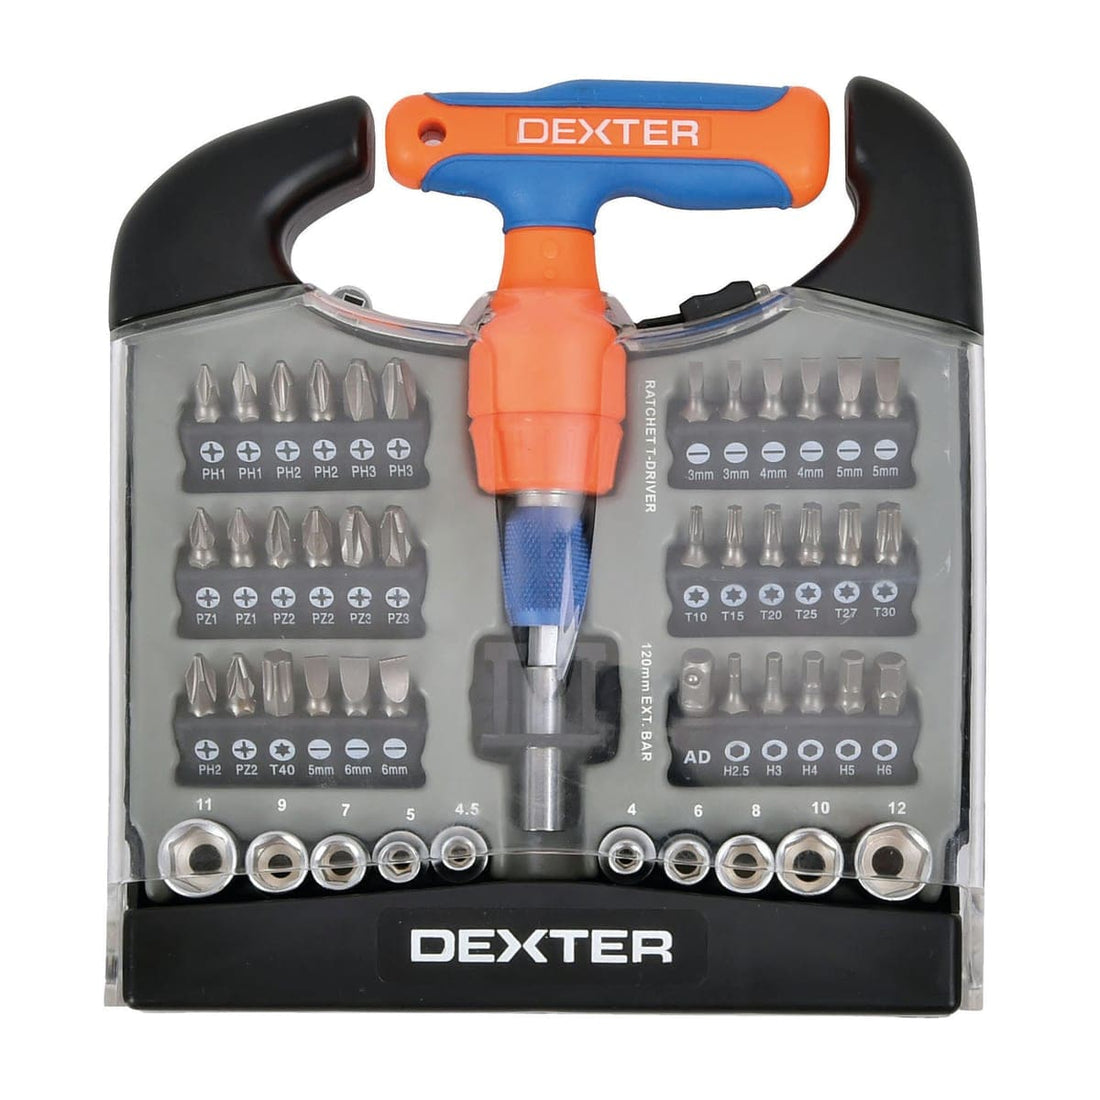 DEXTER T-SCREWDRIVER WITH BITS AND SOCKETS 48 PIECES